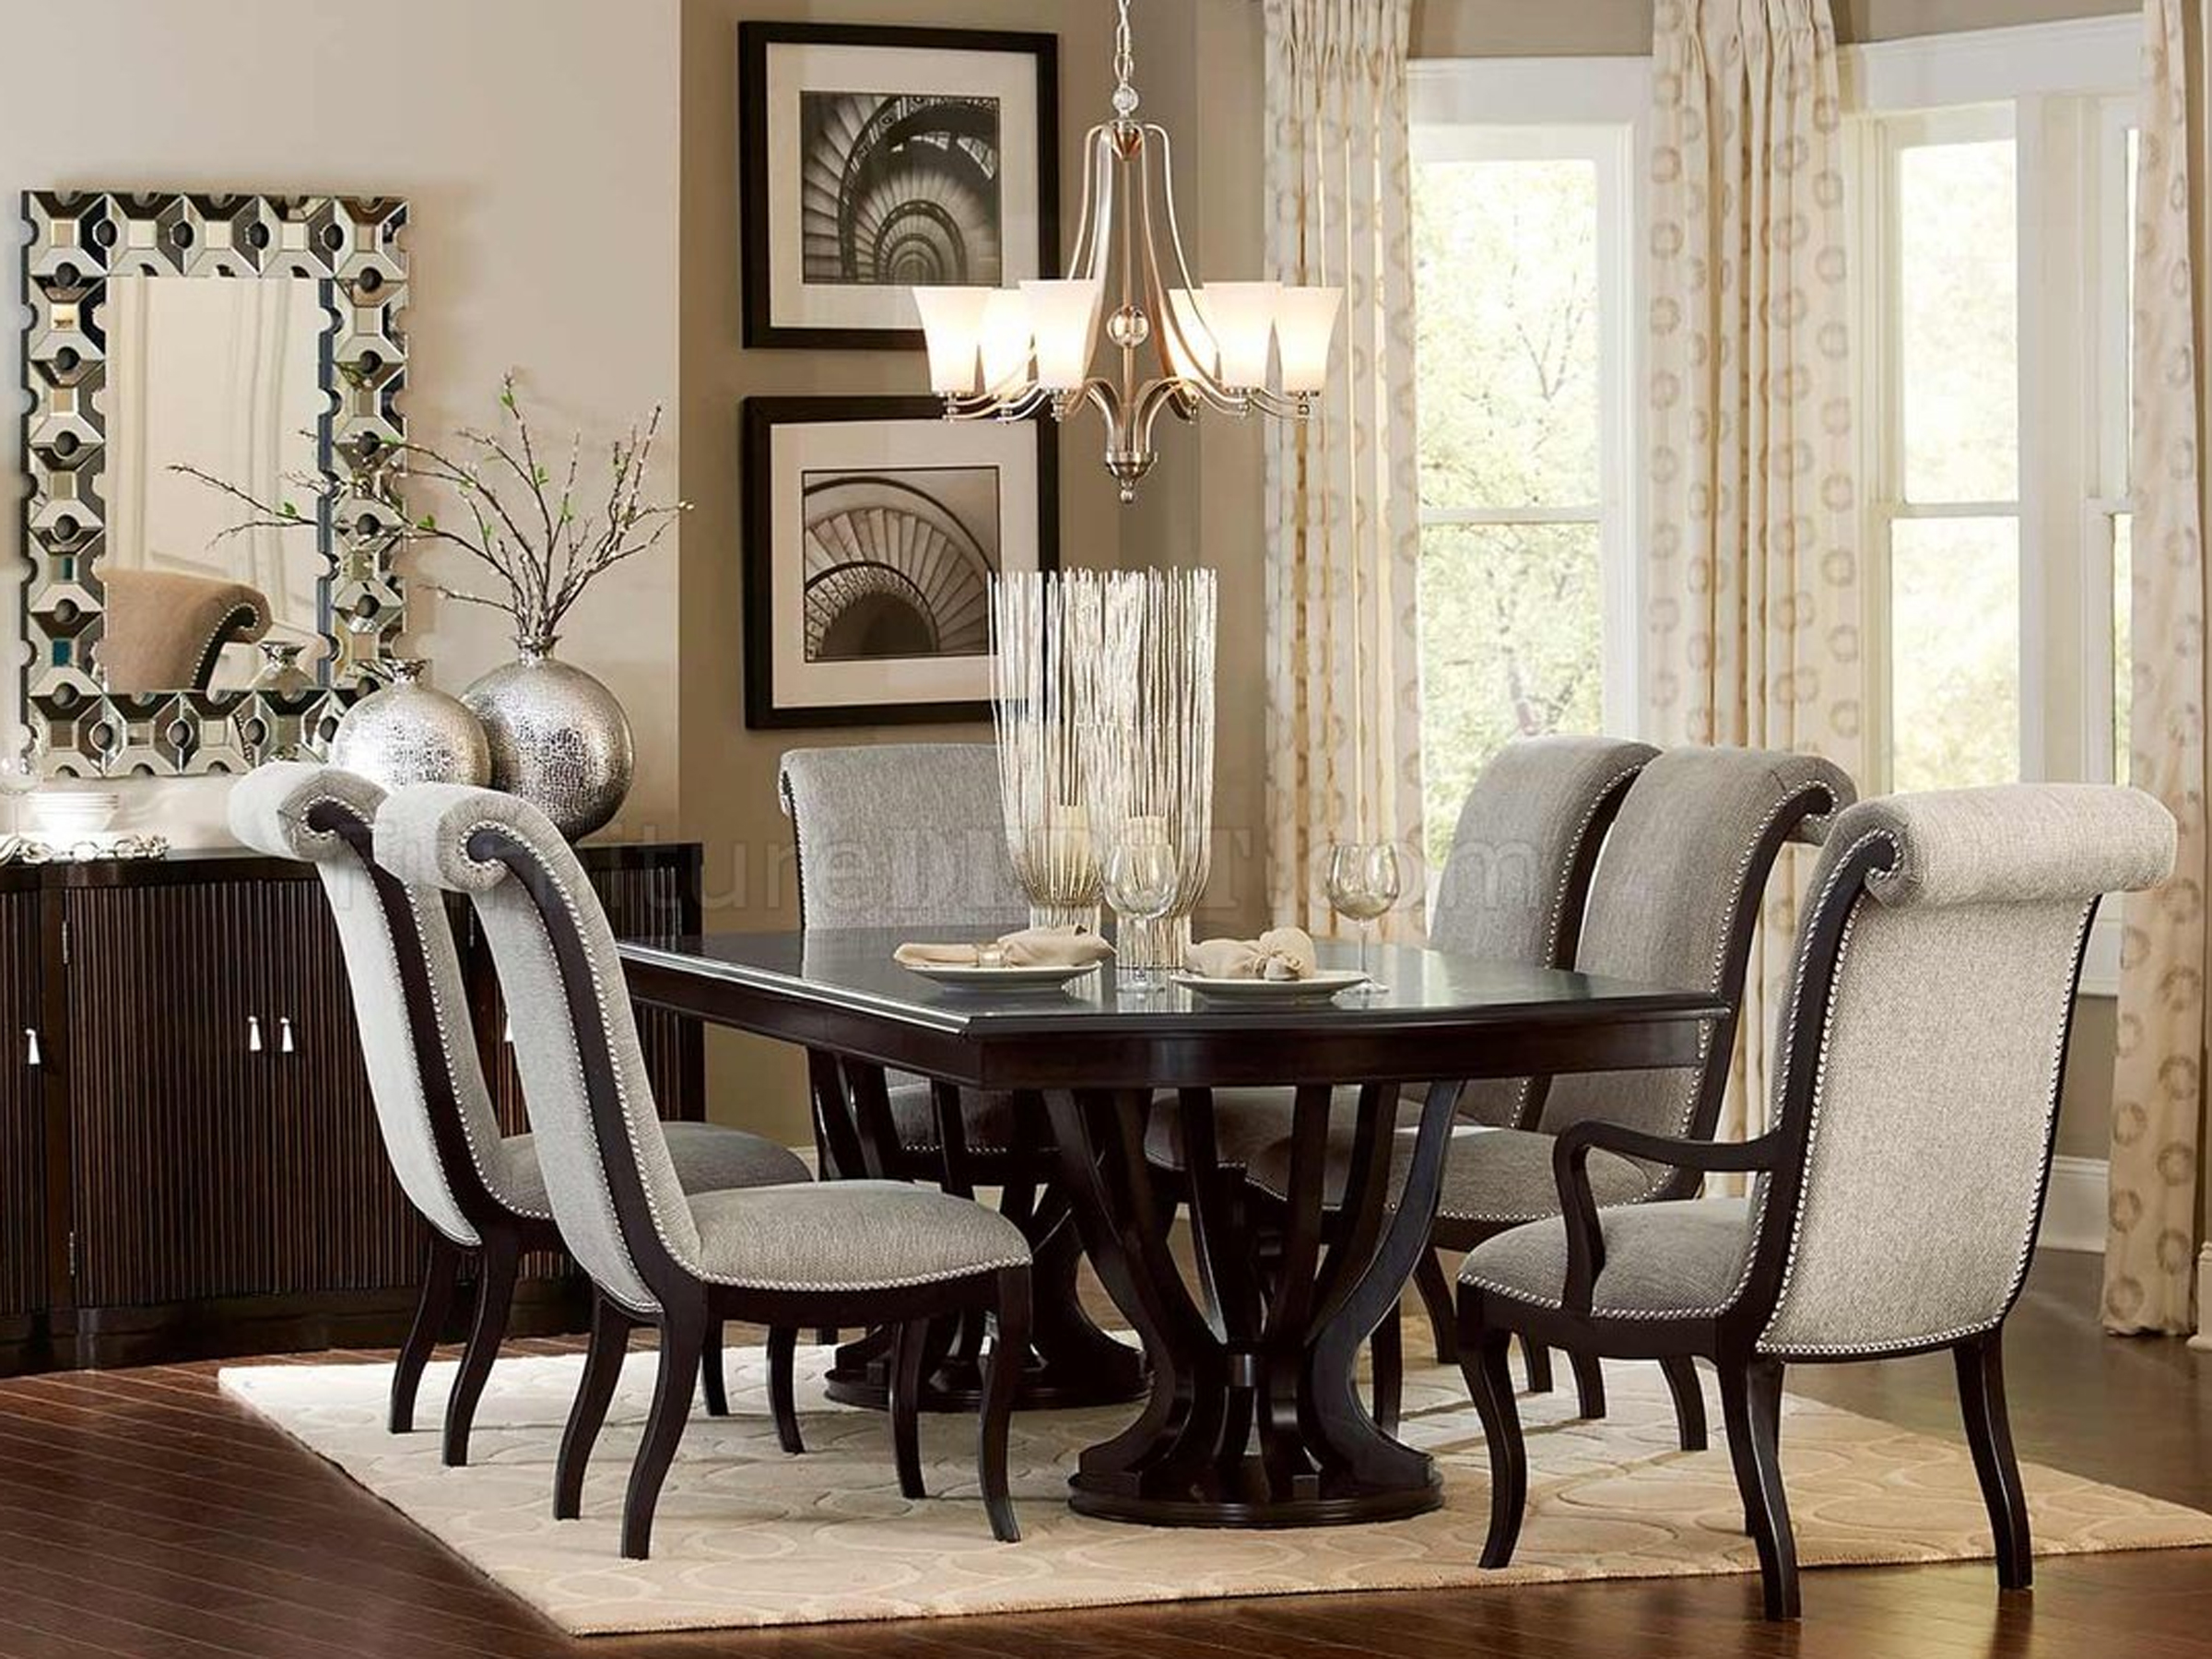 77he549477, Elegant Dining Room Table And Chairs